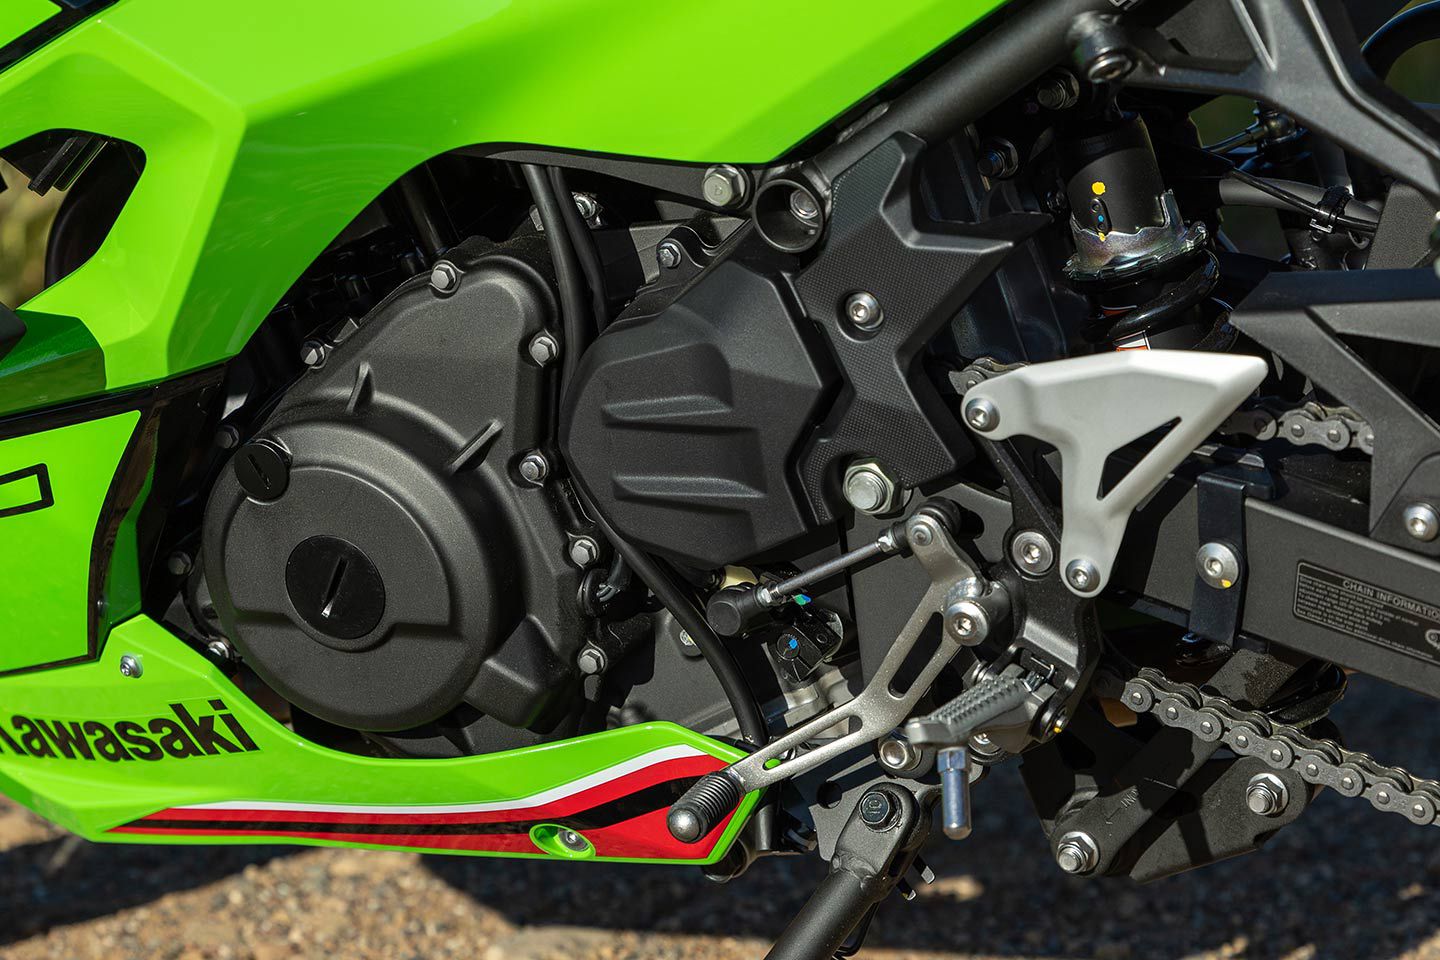 The biggest change? The roughly 50cc bump from 399cc to 451cc on the Ninja 500. Some debate if the naming convention is fair, rounding up all the way to 500 from 450.